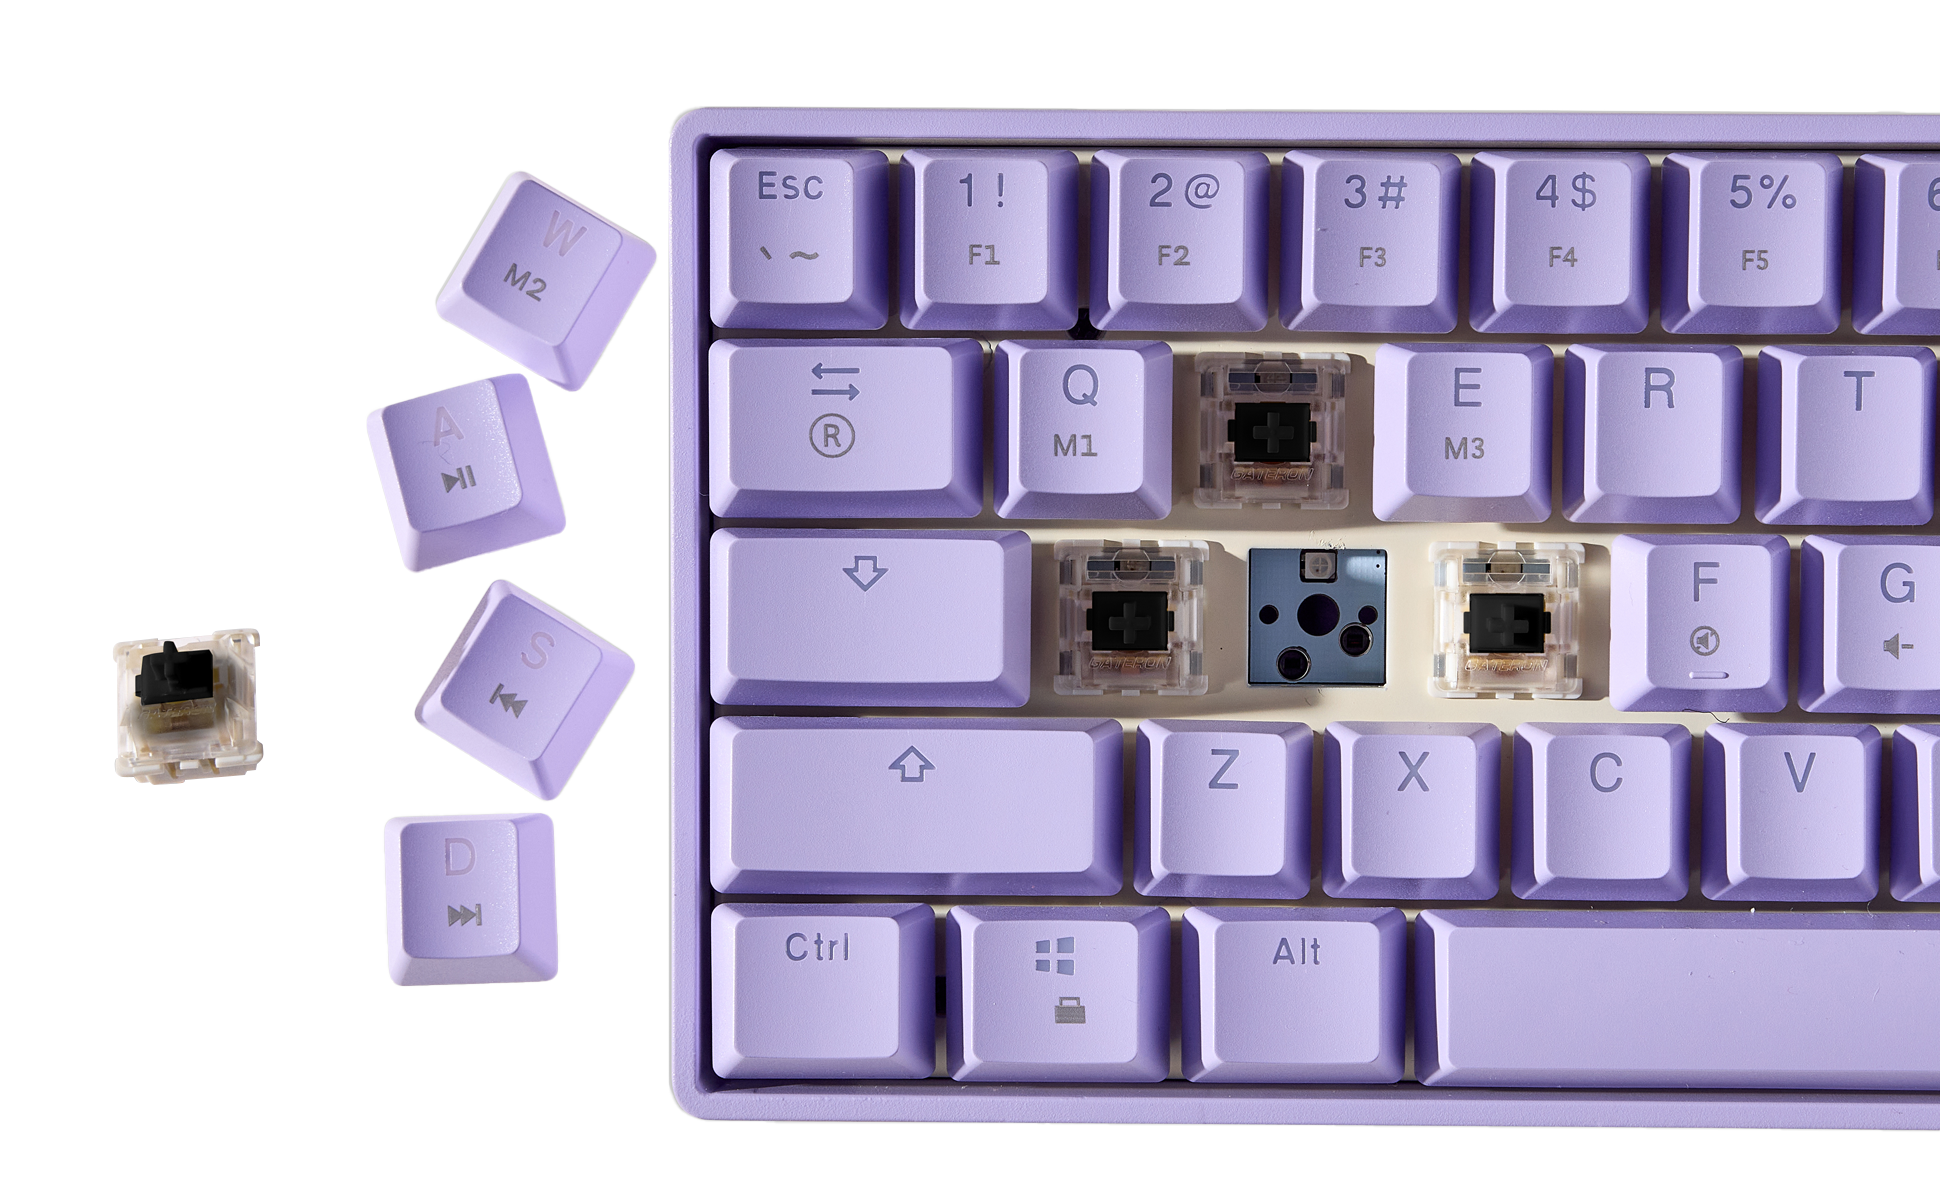 PERSONALIZE YOUR PLAY GK61 HK Gaming